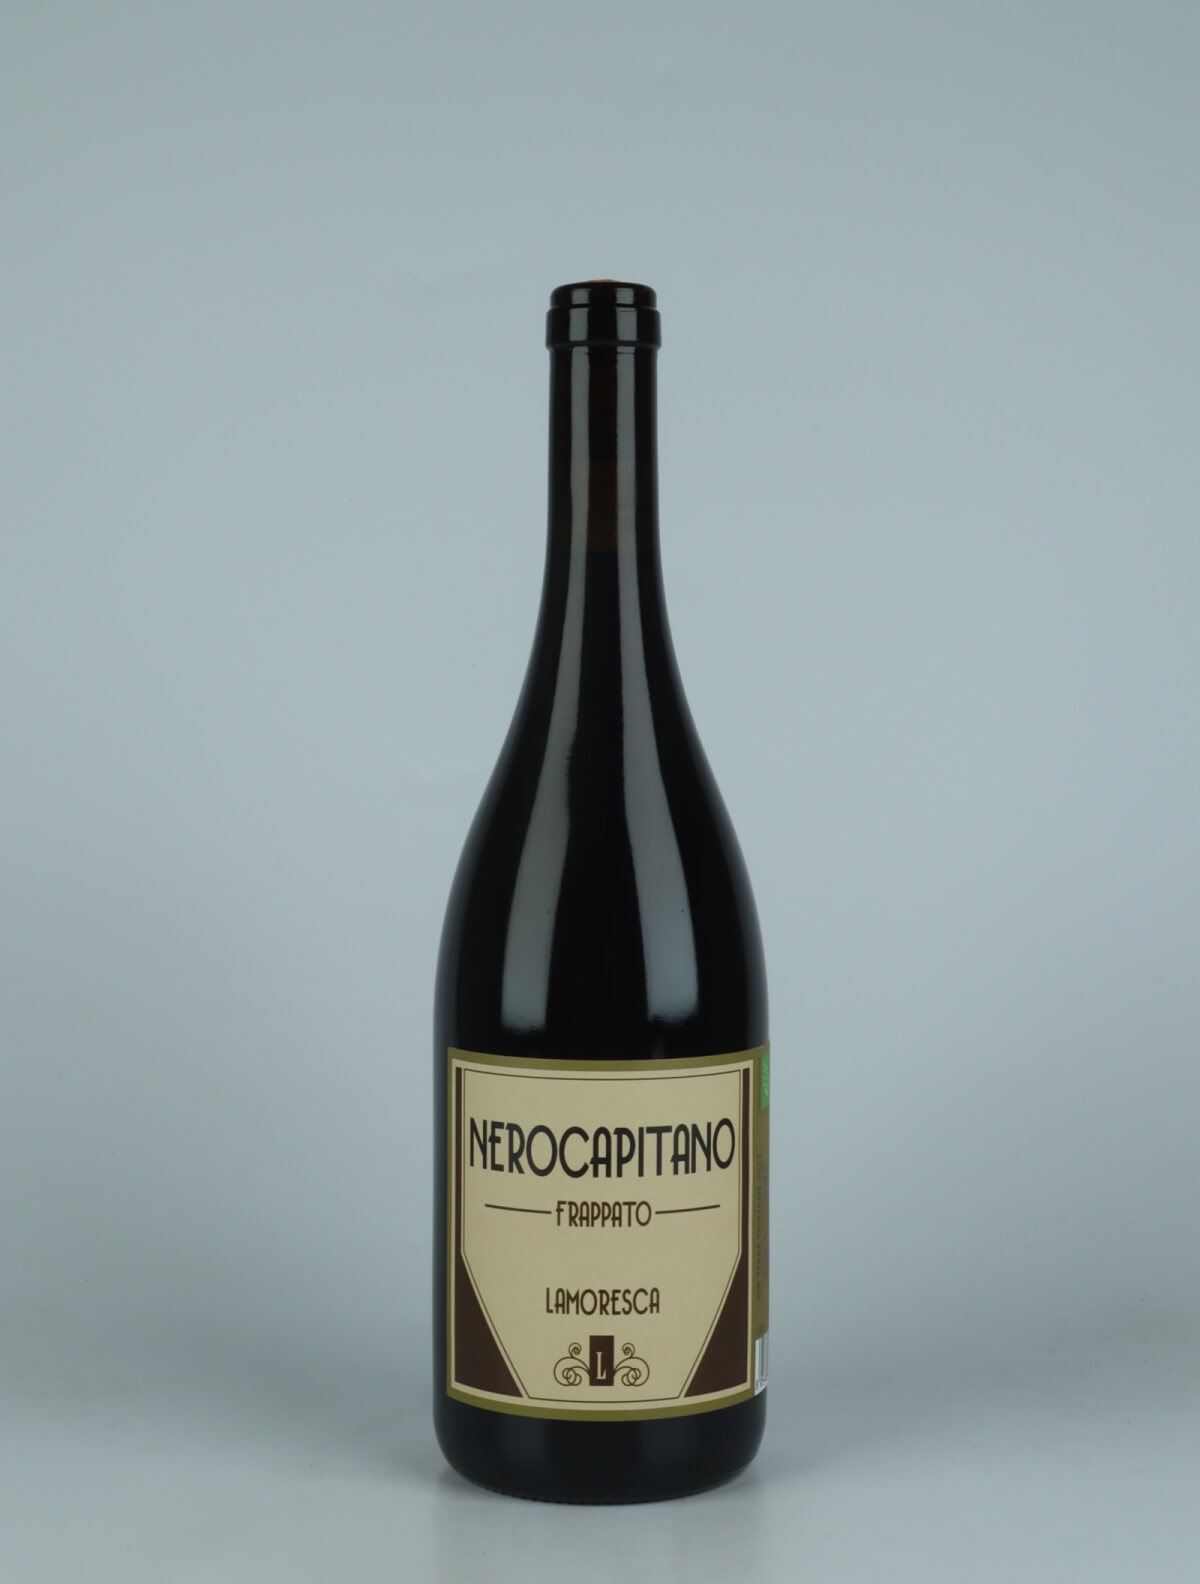 A bottle 2023 Nerocapitano Red wine from Lamoresca, Sicily in Italy